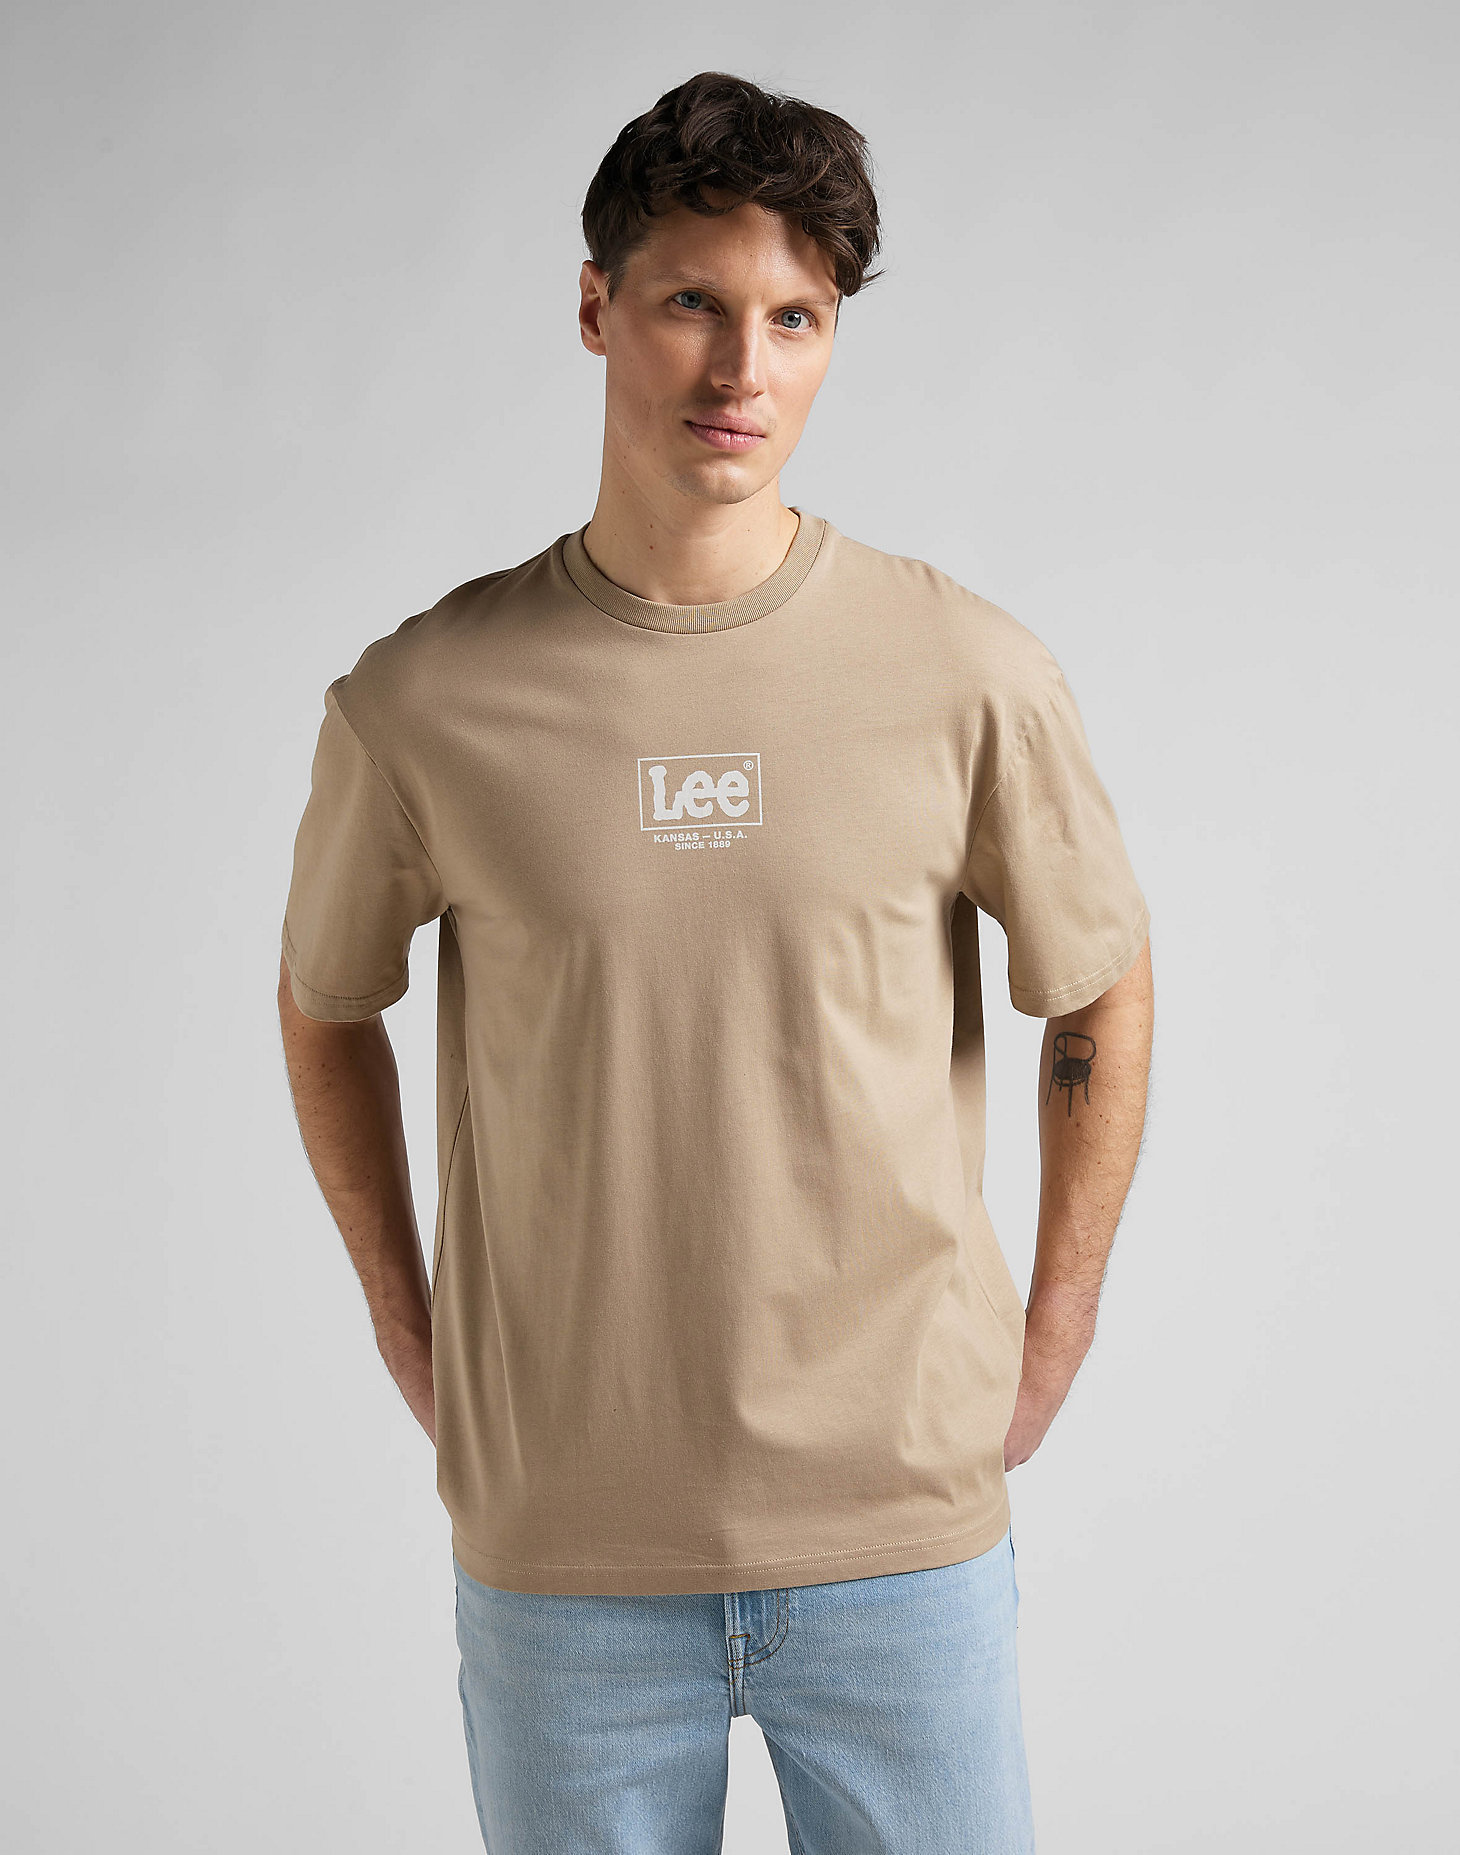 Logo Loose Tee in Clay main view